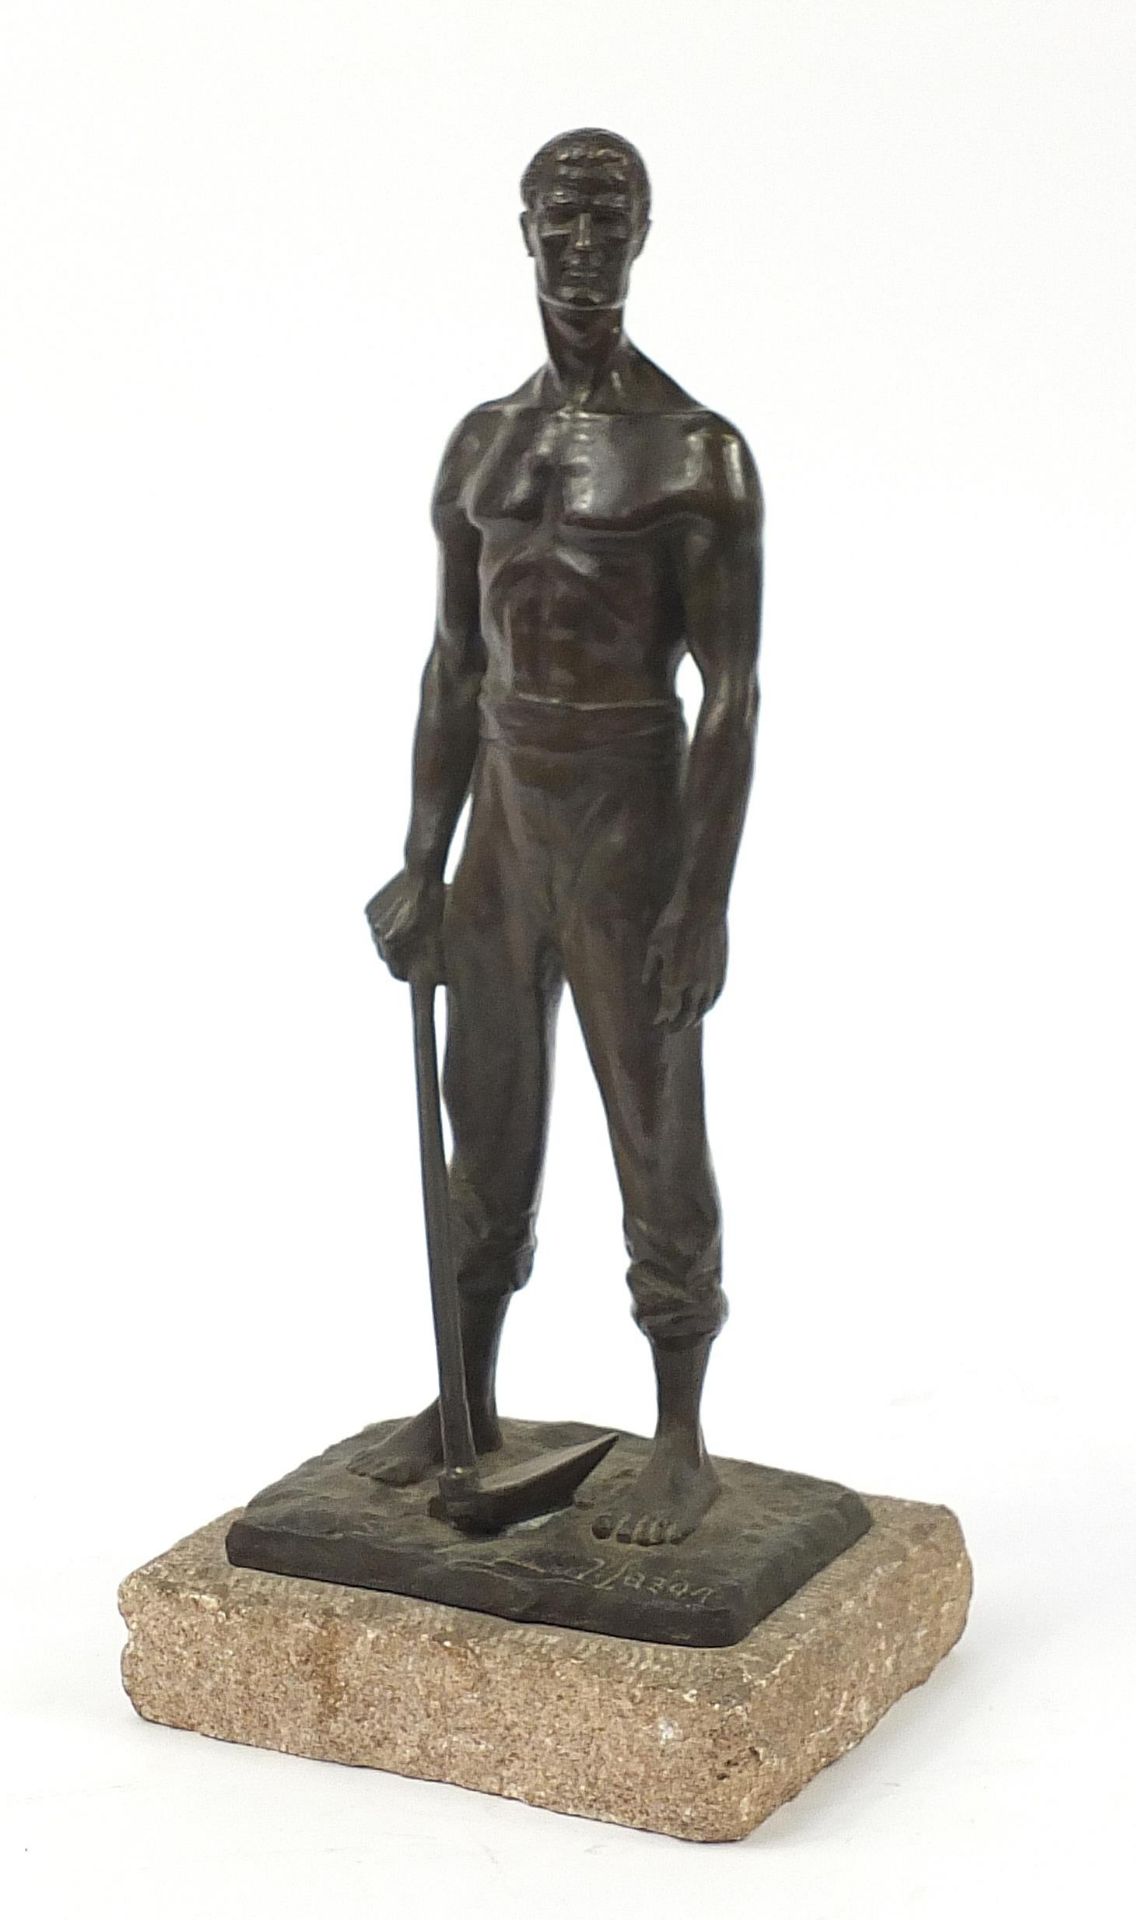 Industrial bronze figure of a workman holding a digging hoe signed N Barabotti, 43.5cm high